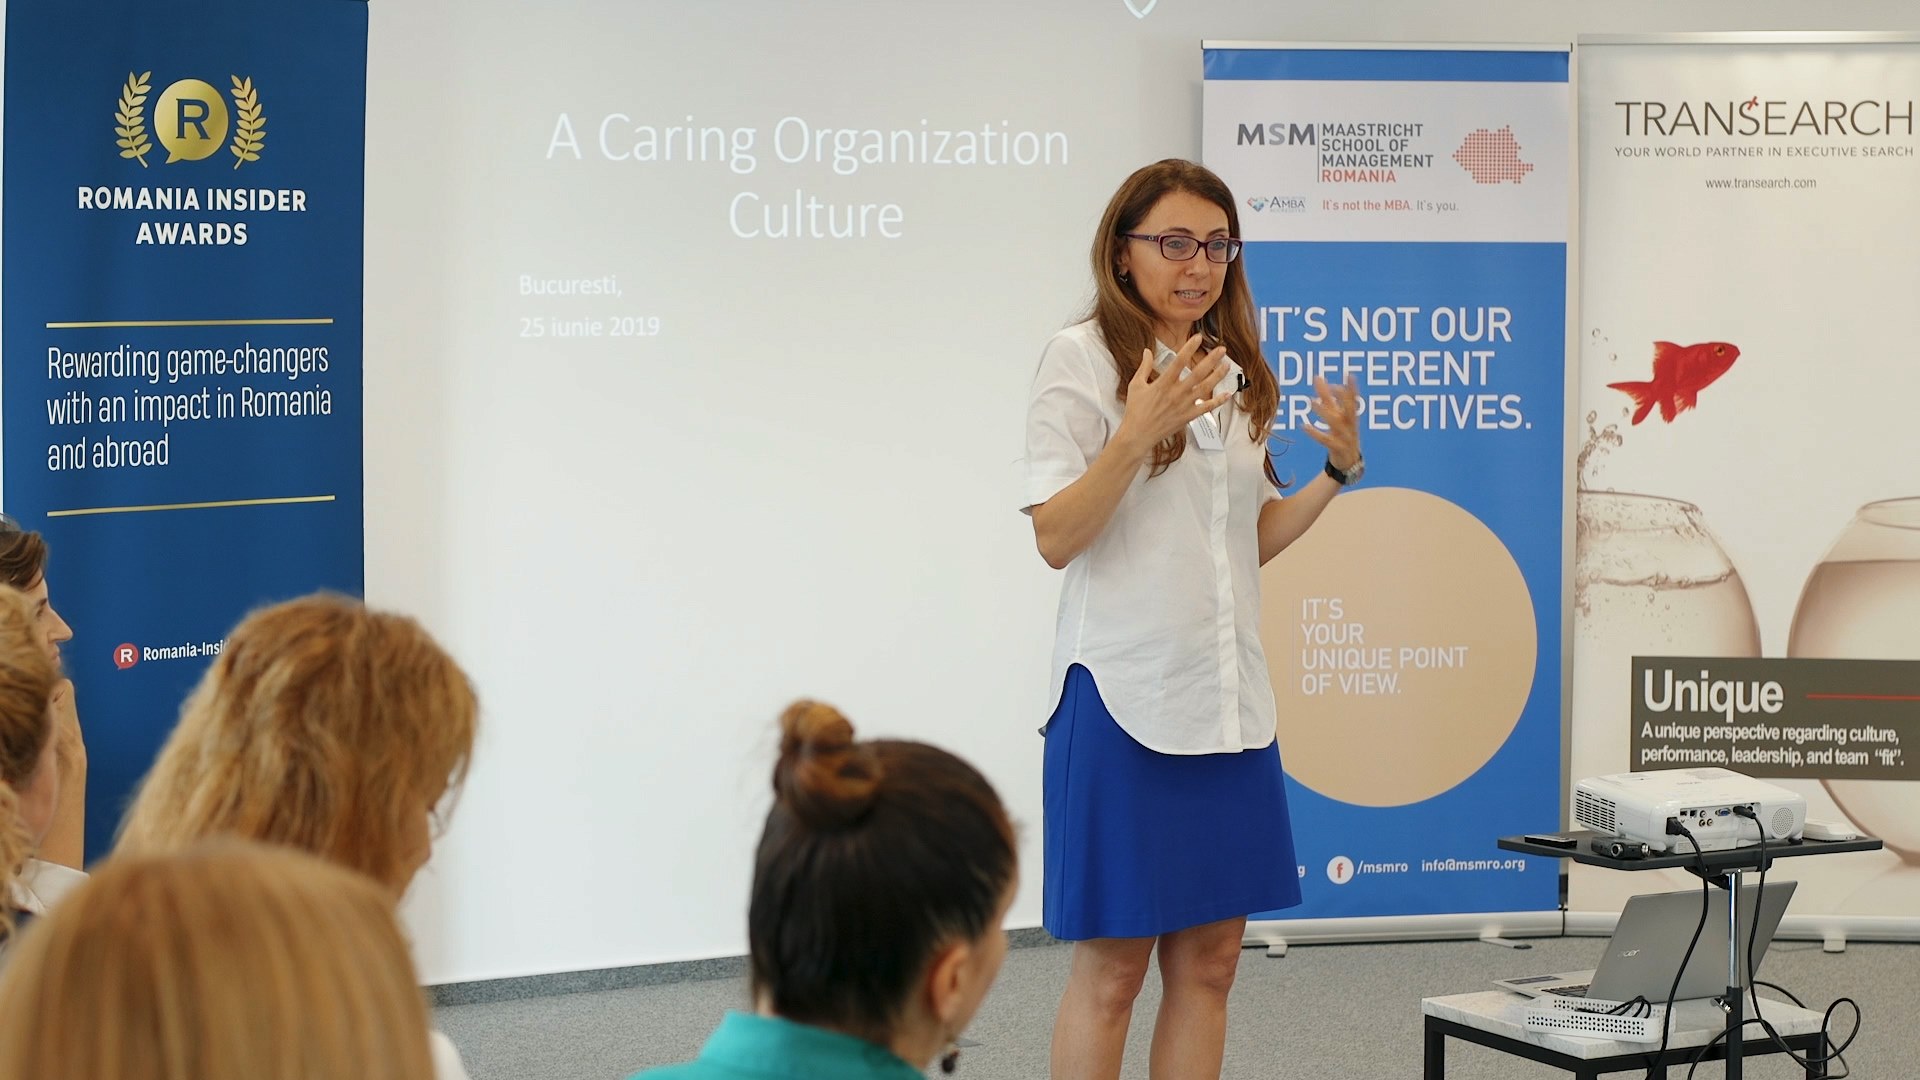 HR Executive Learning Breakfast - 25 June 2019